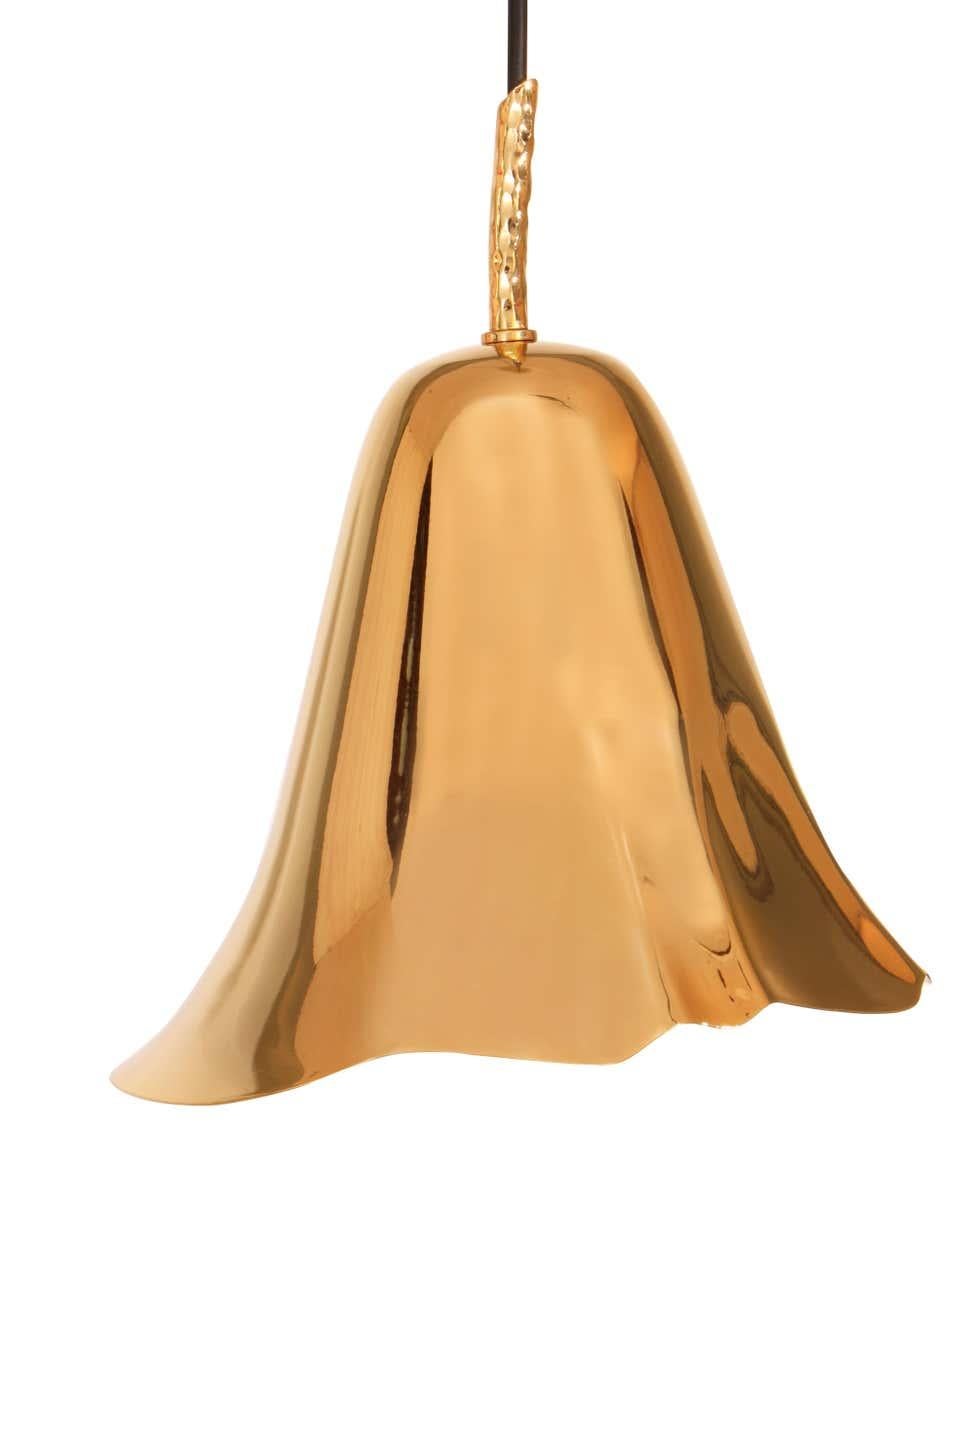 Pendant consists of a hand sculpted metal calla lily freely suspended from a single string.

Structure: Gold-plated brass with high gloss finish
Cable: 2 m / 78.7 in
Dimensions:
Height 9.45 in. (24 cm)
Width 7.88 in. (20 cm)
Depth 7.88 in.